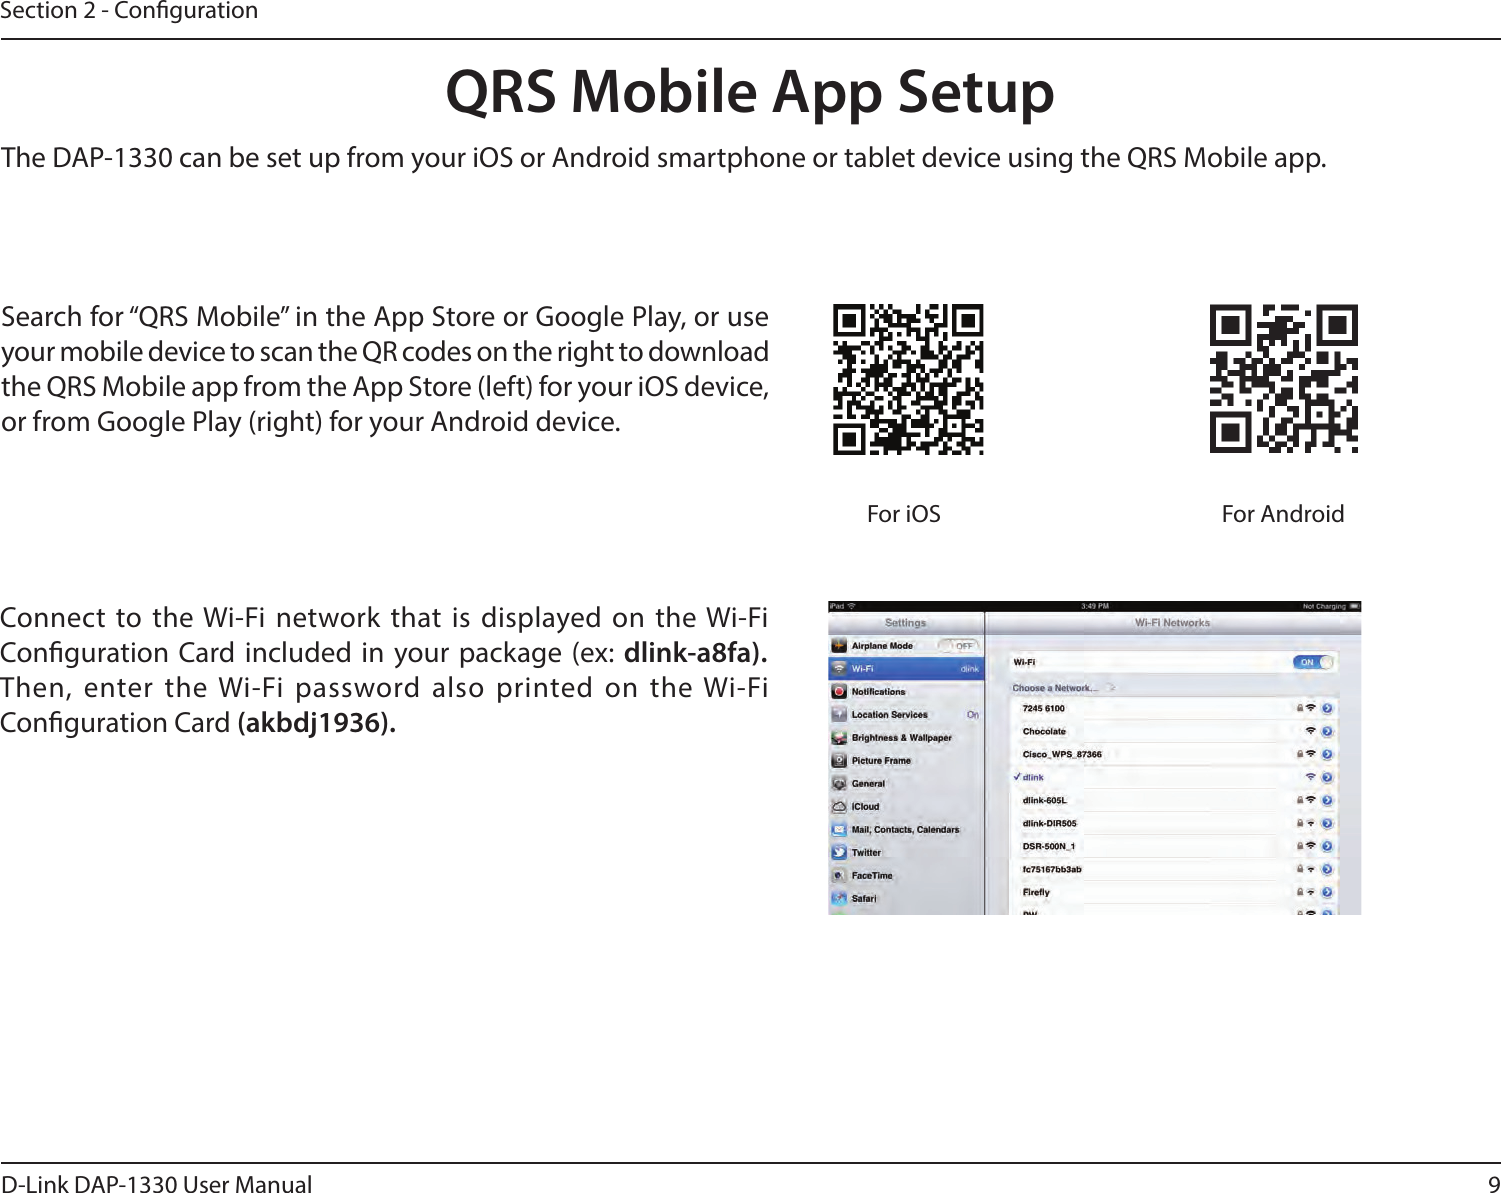 9D-Link DAP-1330 User ManualSection 2 - CongurationQRS Mobile App SetupSearch for “QRS Mobile” in the App Store or Google Play, or use your mobile device to scan the QR codes on the right to download the QRS Mobile app from the App Store (left) for your iOS device, or from Google Play (right) for your Android device.For iOS For AndroidConnect to the Wi-Fi network that is displayed on the Wi-Fi Conguration Card included in your package (ex: dlink-a8fa). Then, enter the Wi-Fi password also printed on the Wi-Fi Conguration Card (akbdj1936). The DAP-1330 can be set up from your iOS or Android smartphone or tablet device using the QRS Mobile app.